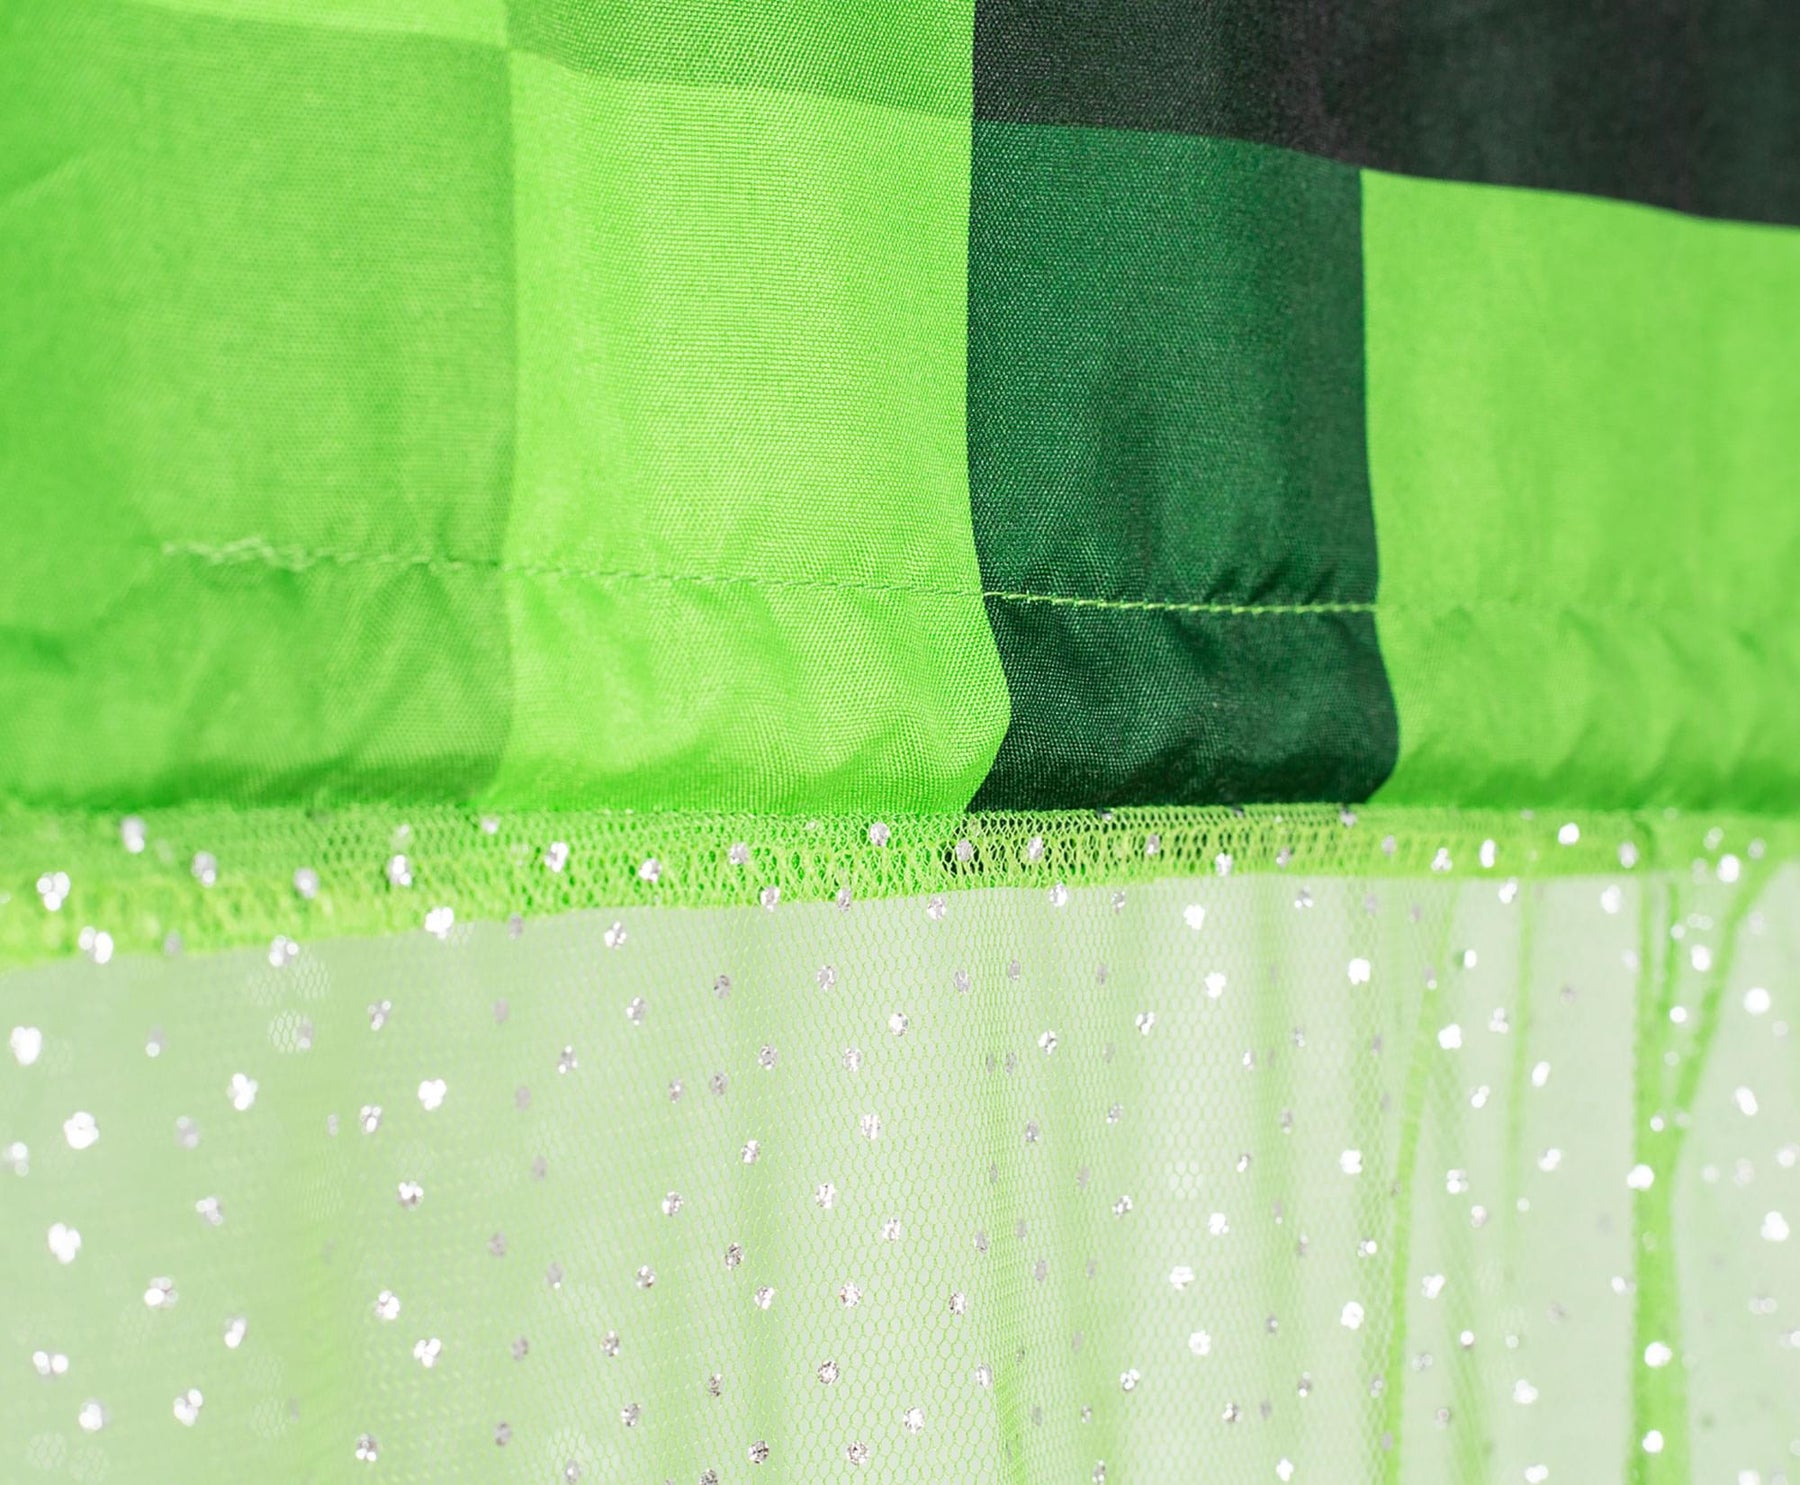 Minecraft Green Creeper Kids Bed Canopy, Hanging Curtain Netting